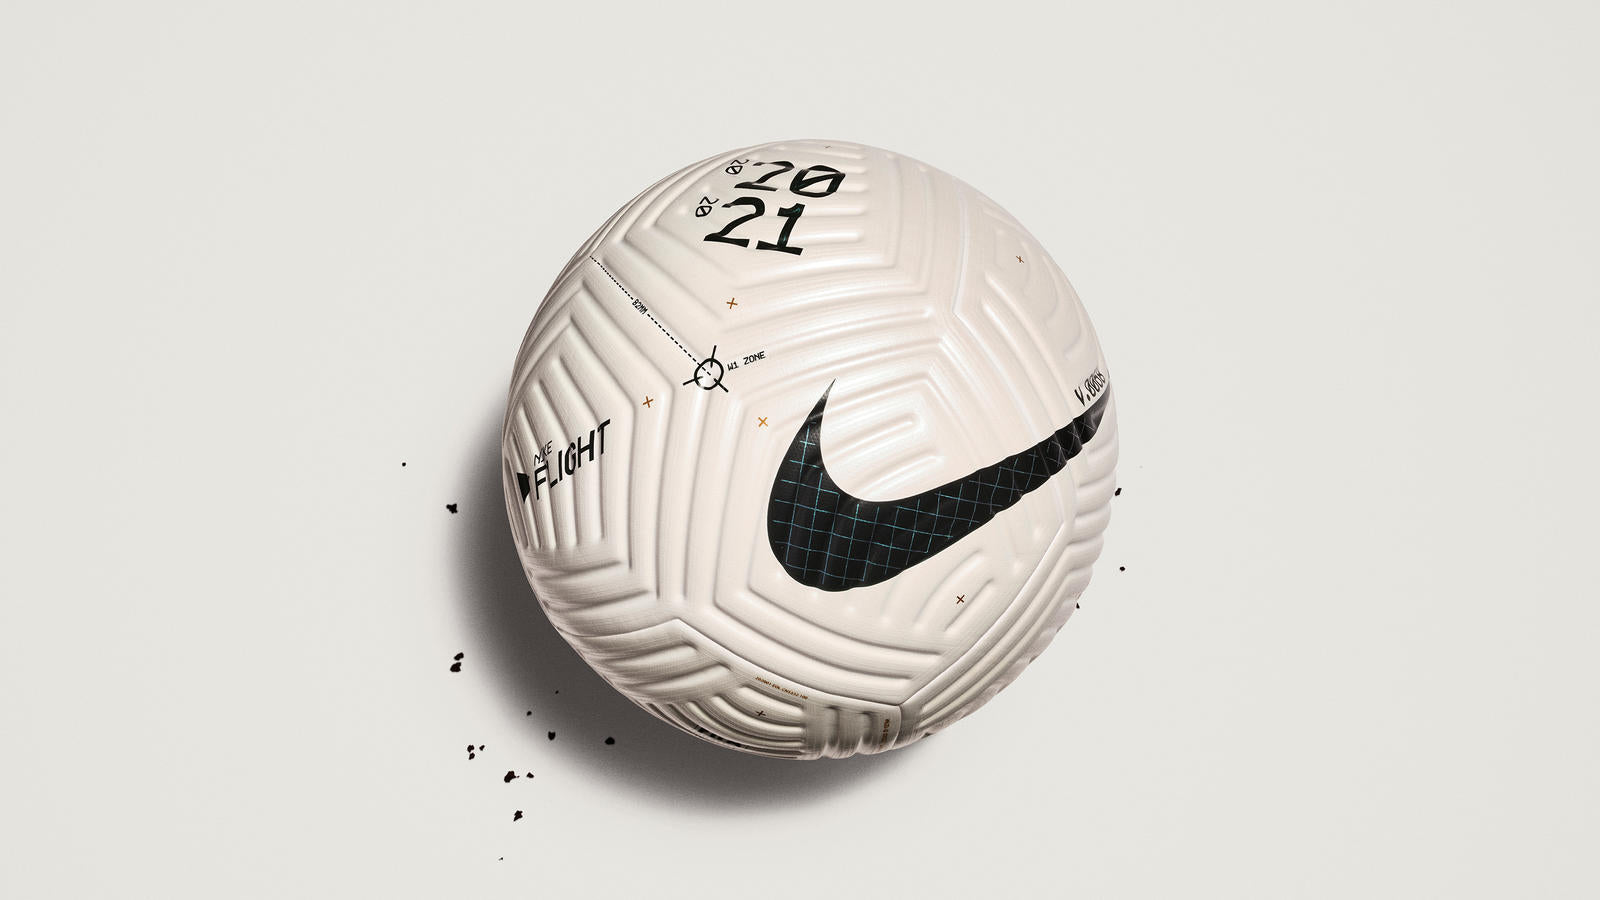 NIKE ANNOUNCES GAME-CHANGING NIKE FLIGHT BALL – Cult Kits